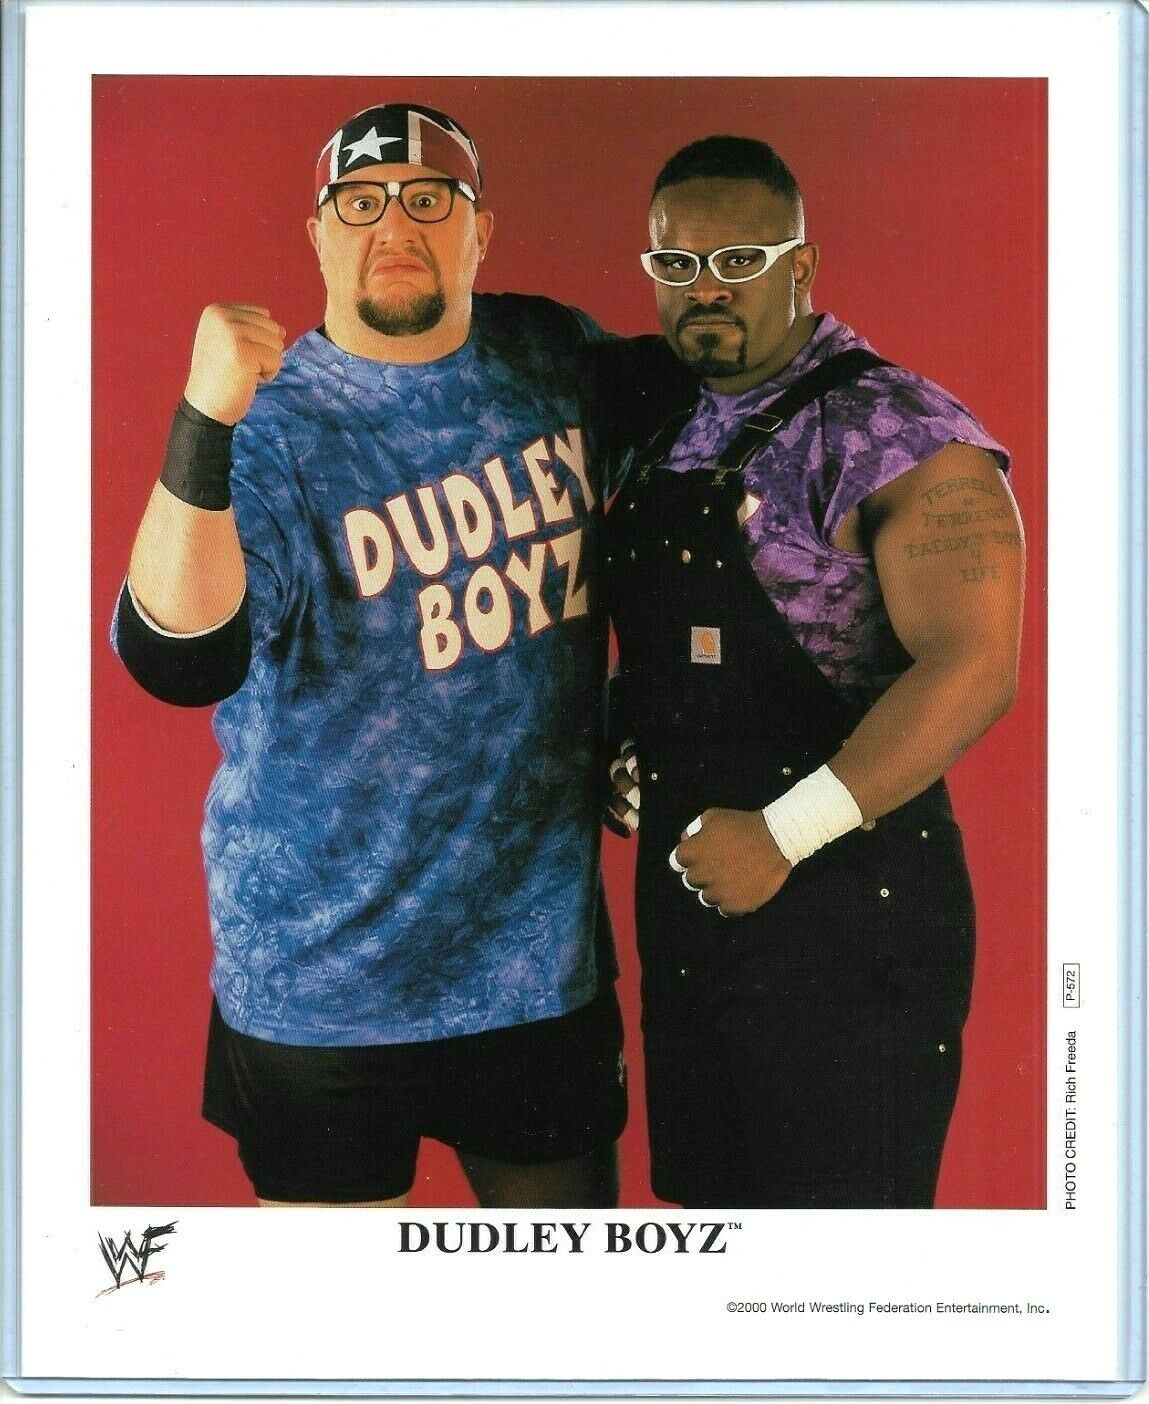 WWE DUDLEY BOYZ P-572 OFFICIAL LICENSED AUTHENTIC ORIGINAL 8X10 PROMO Photo Poster painting RARE